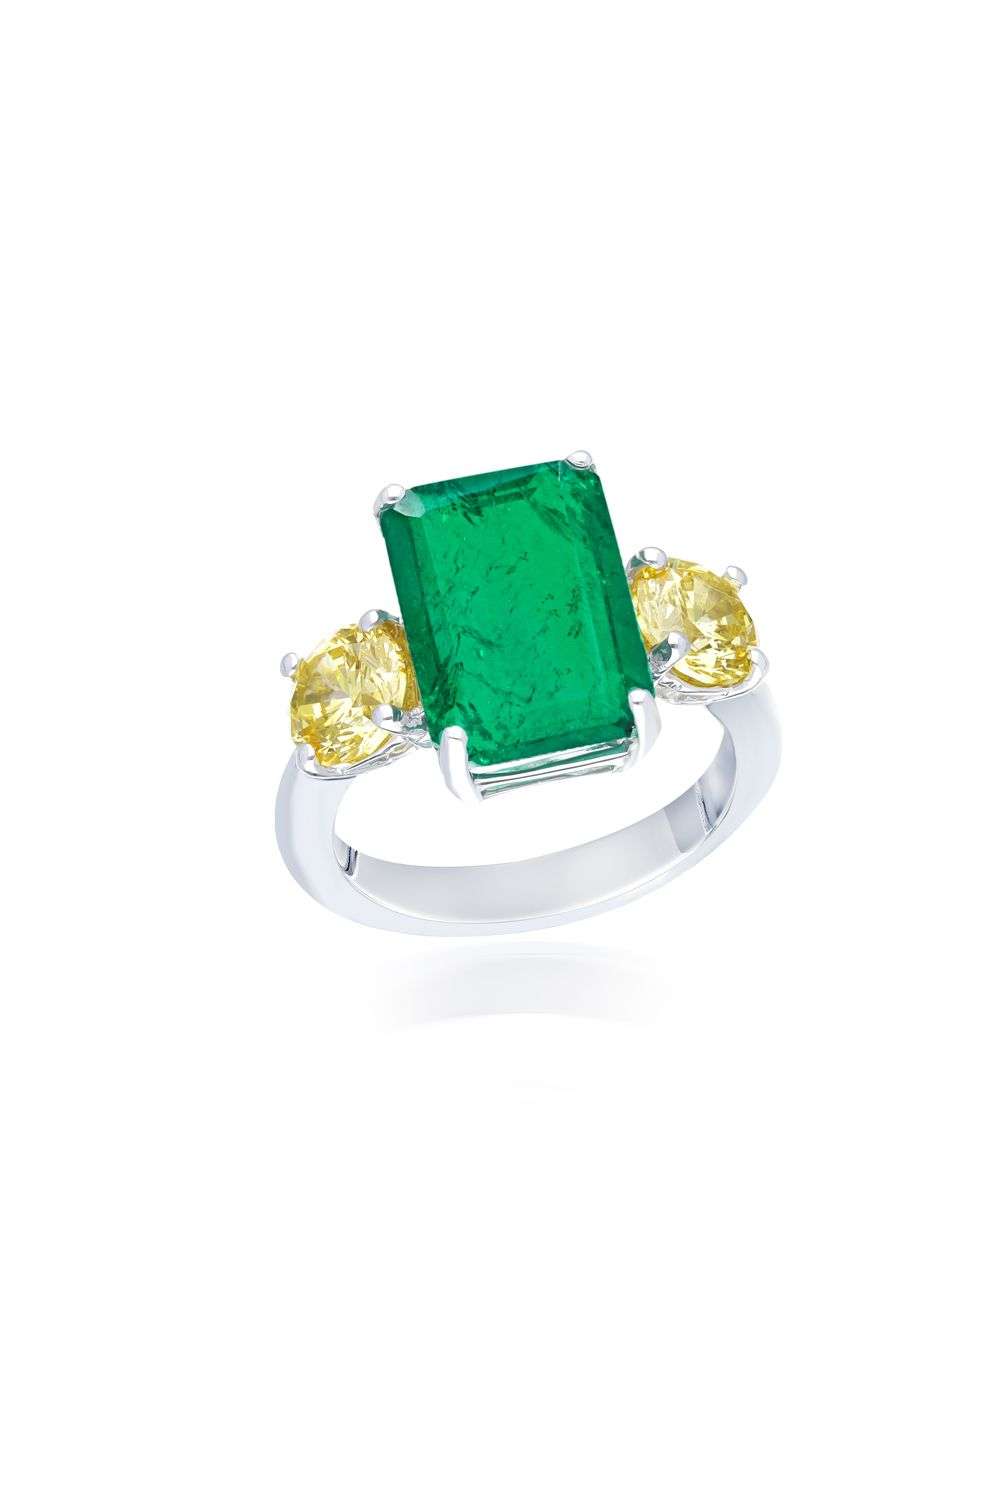 Emerald Cocktail Ring for Women 925 Sterling Silver Jewelry Handmade Pave  Set CZ | eBay